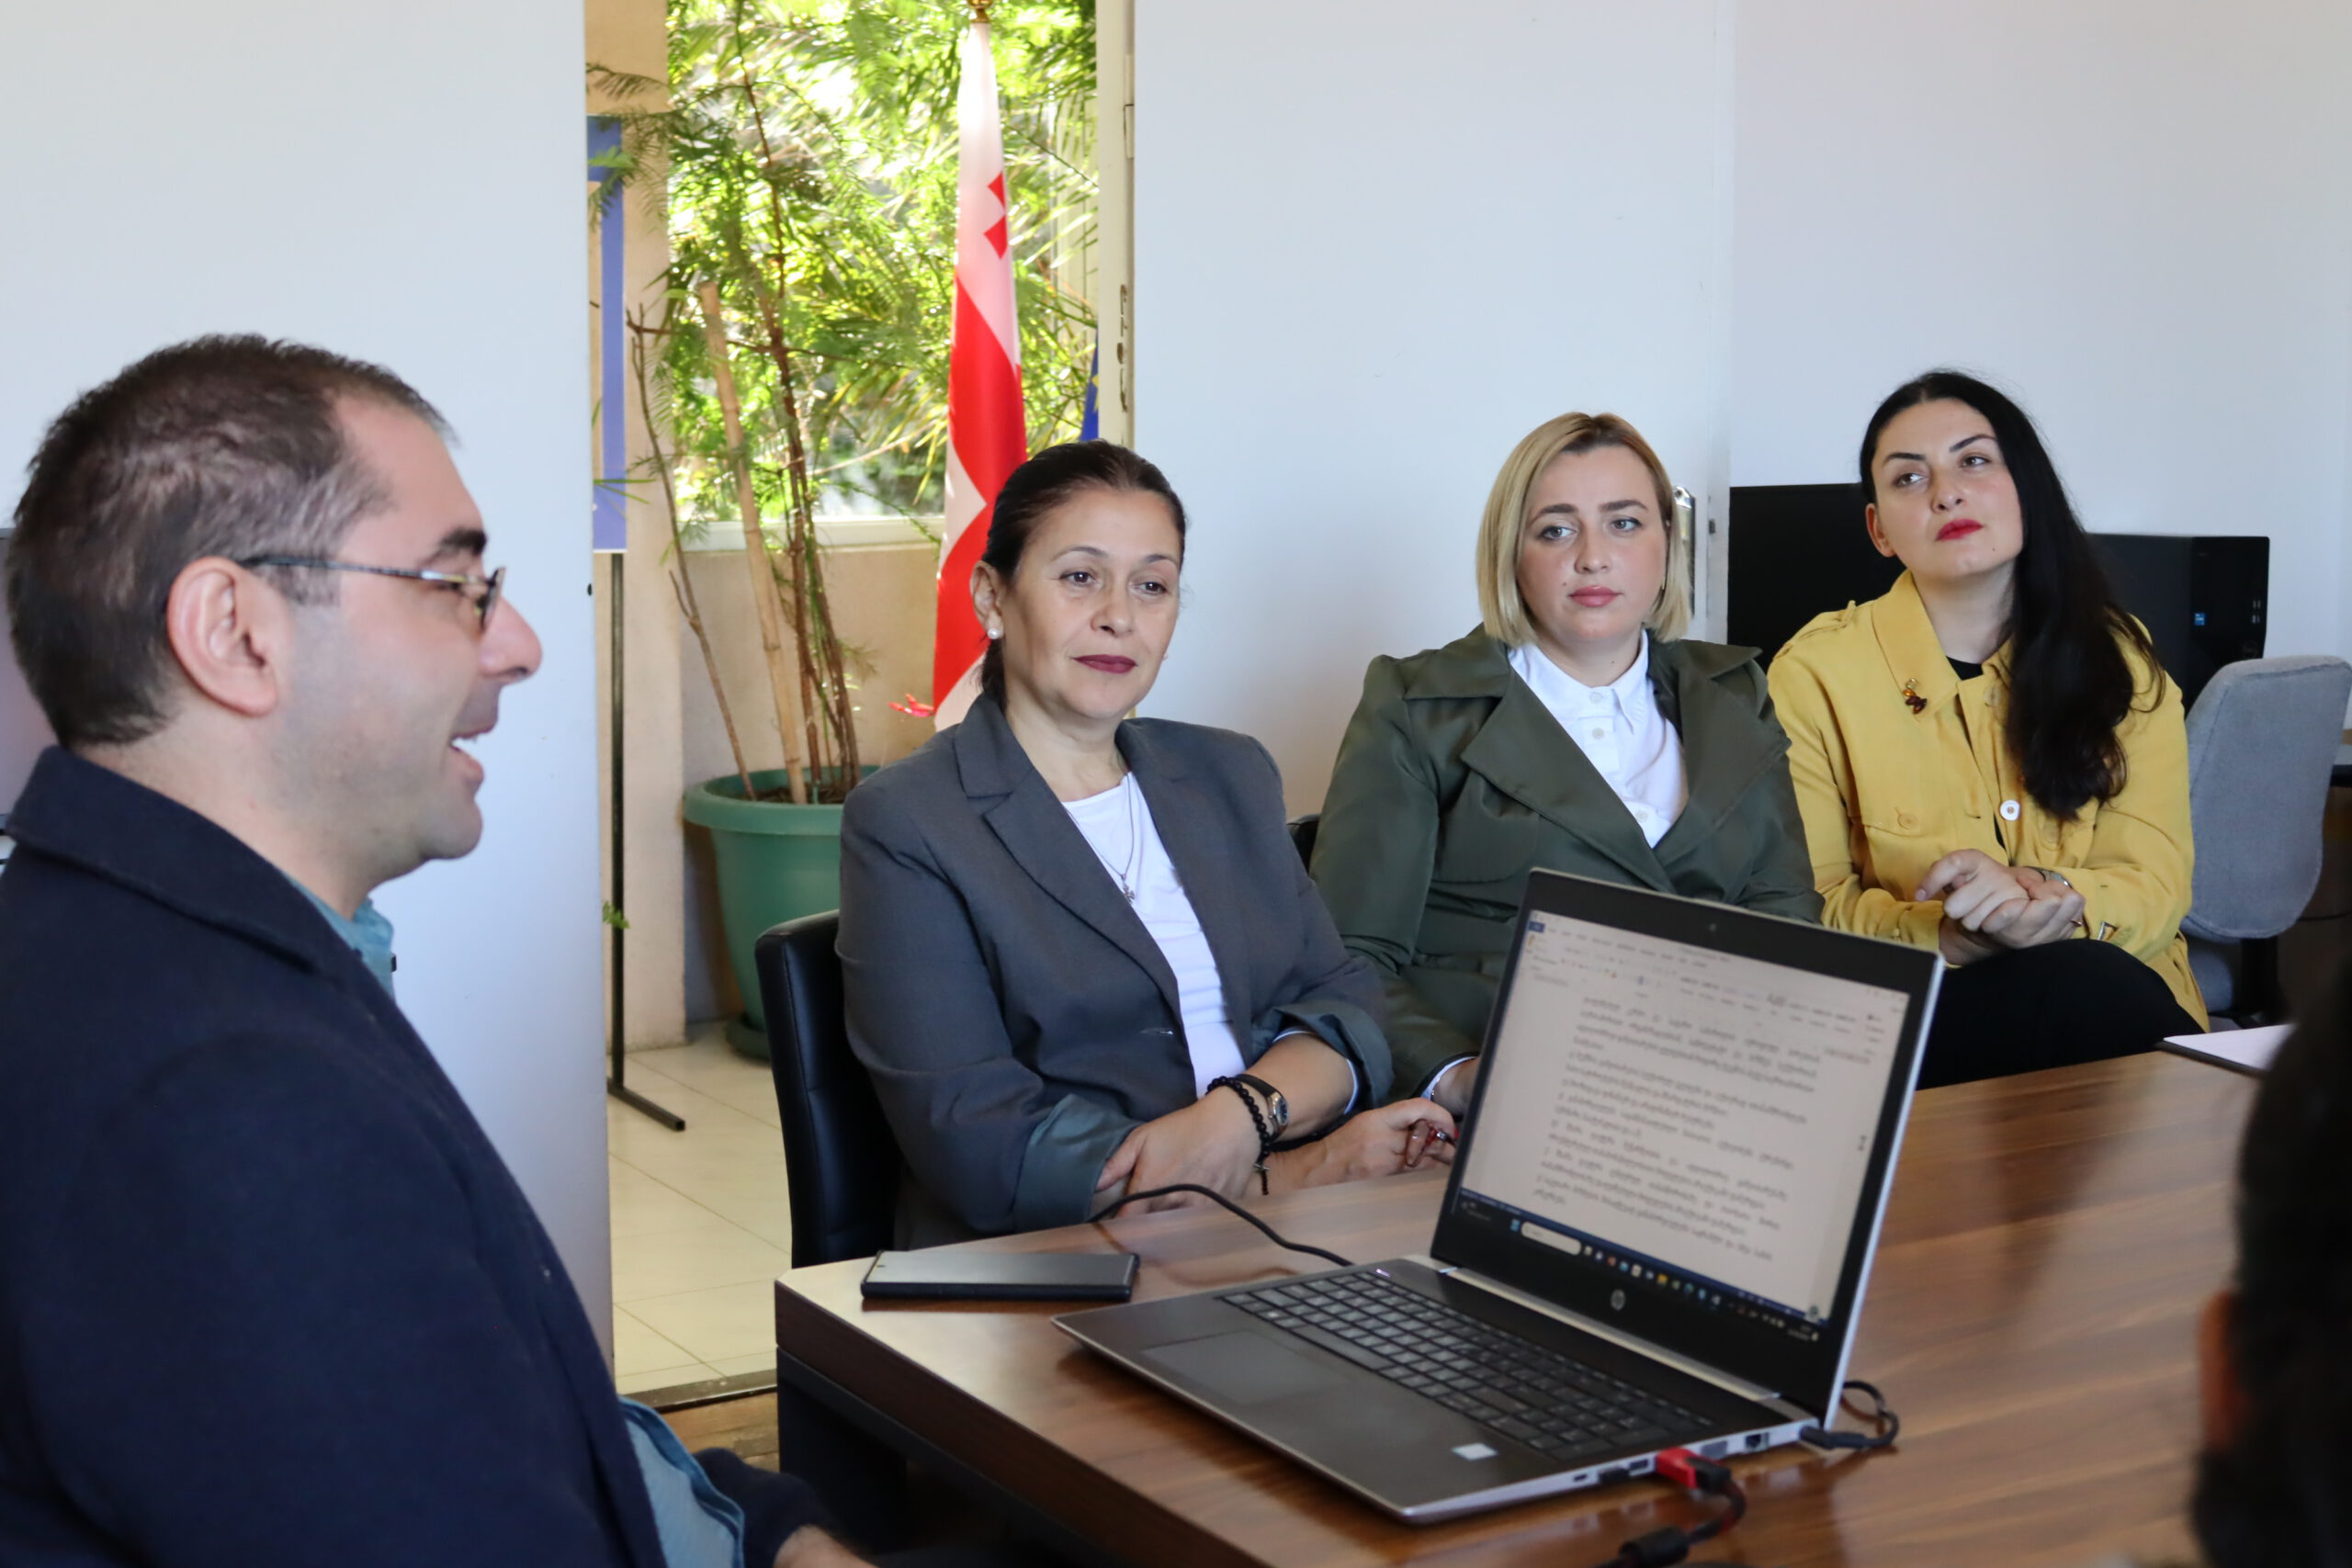 The management board of Ozurgeti’s local action group approved the working version of the LAG charter and sectoral directions